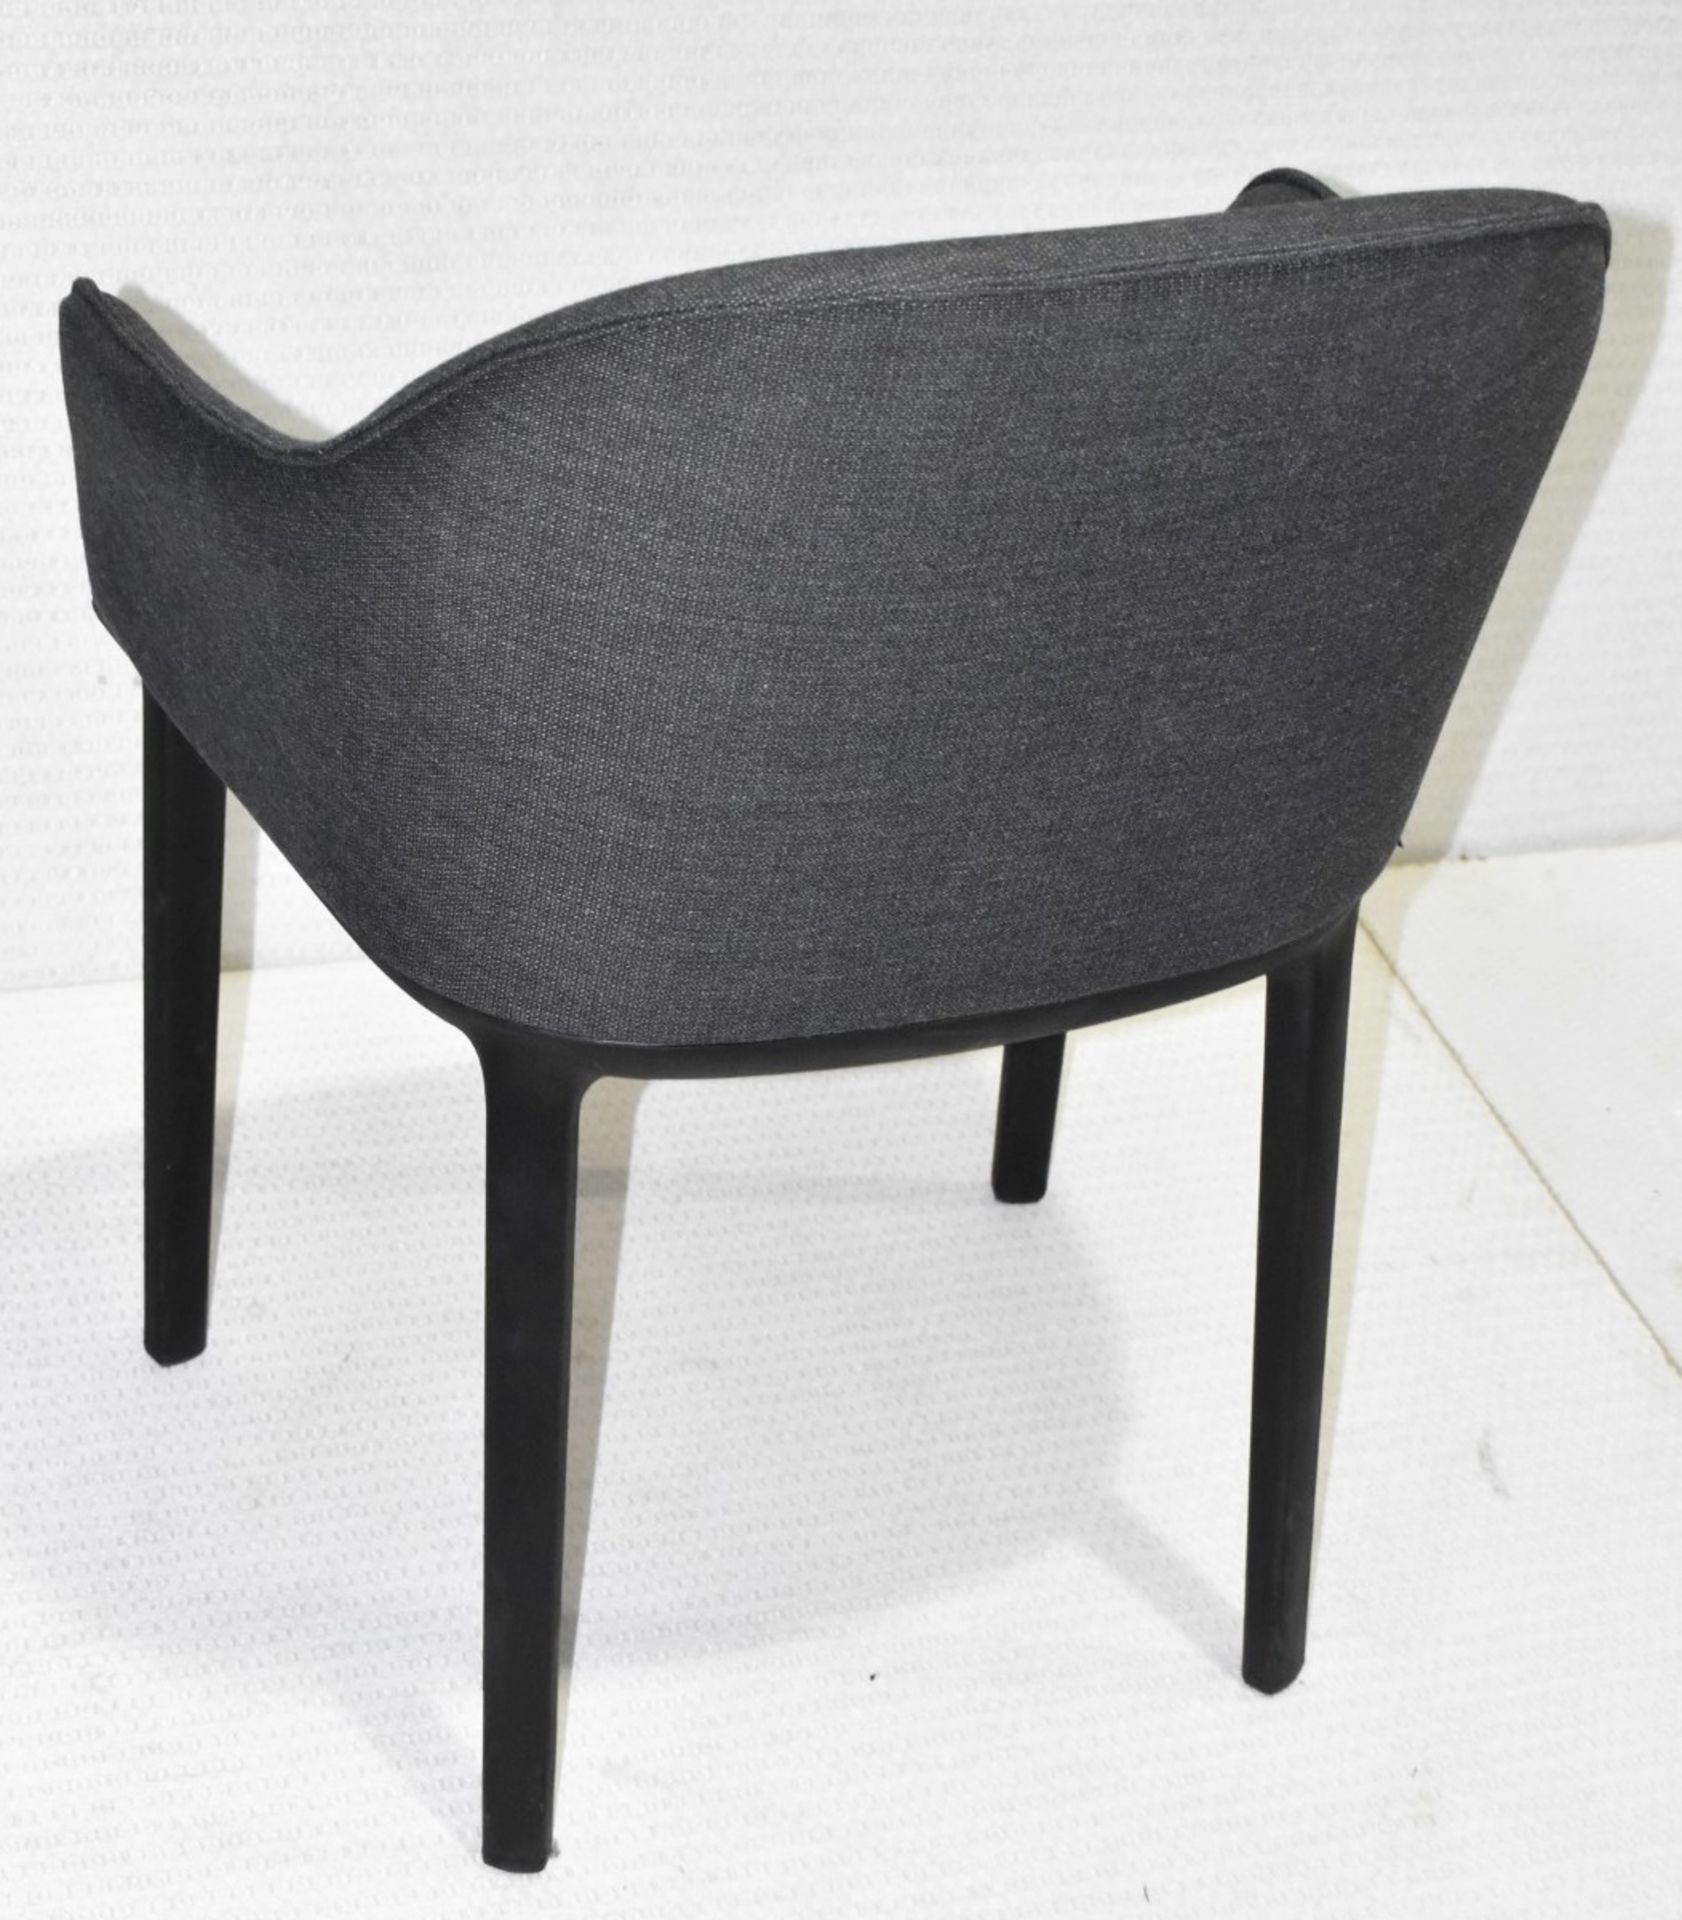 1 x VITRA 'Softshell' Fabric Upholstered Designer Plastic Armchair, in Anthracite Grey - RRP £885.00 - Image 8 of 9